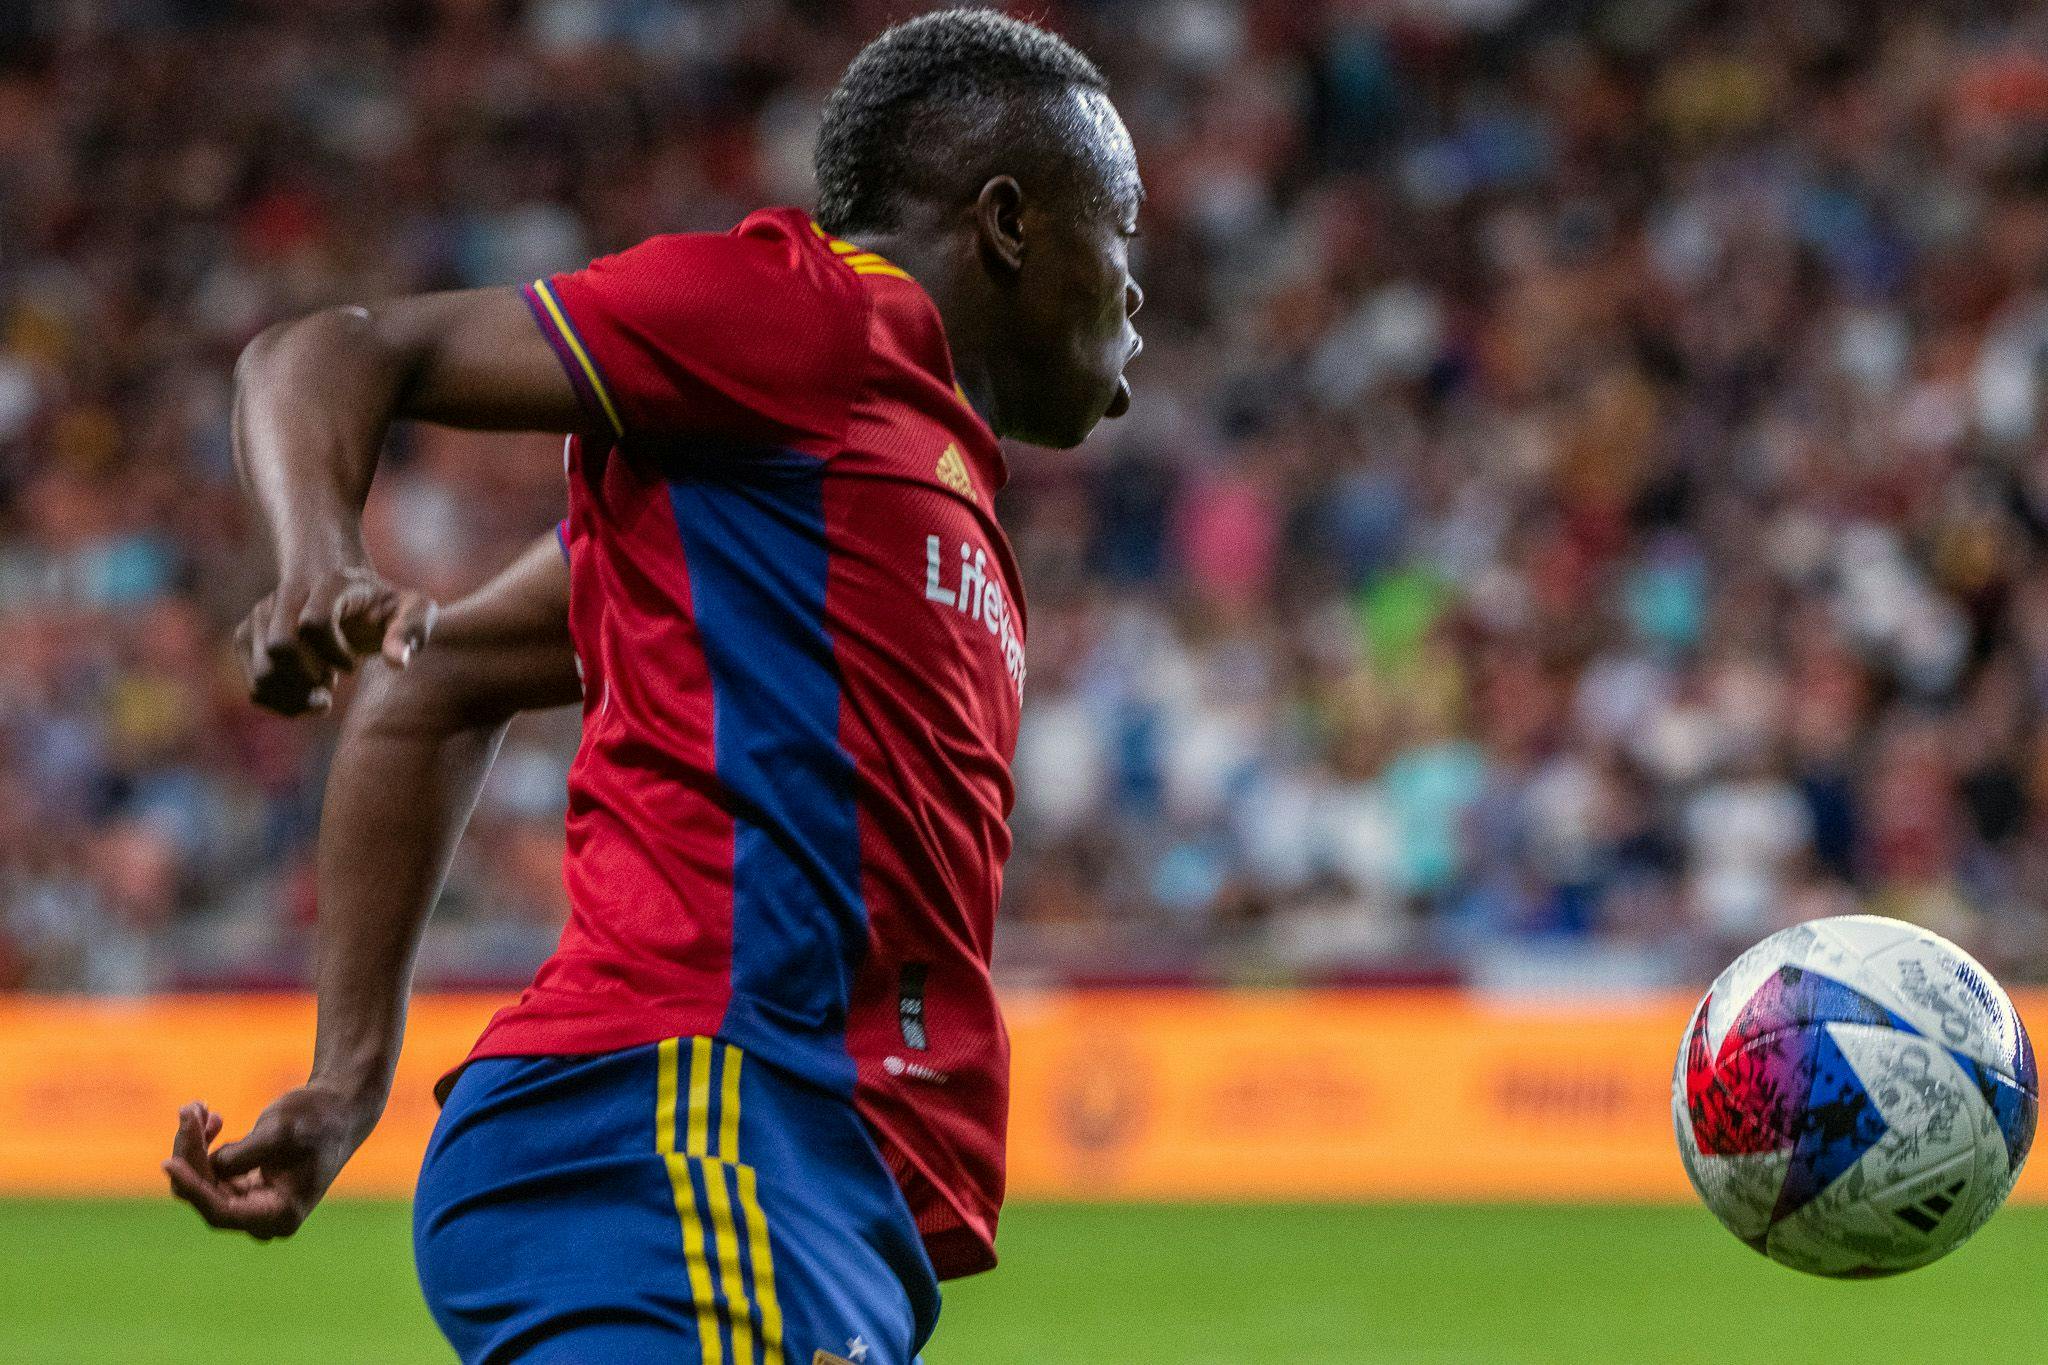 RSL survives two dropped leads, wins 4-3 in U.S. Open Cup over Portland